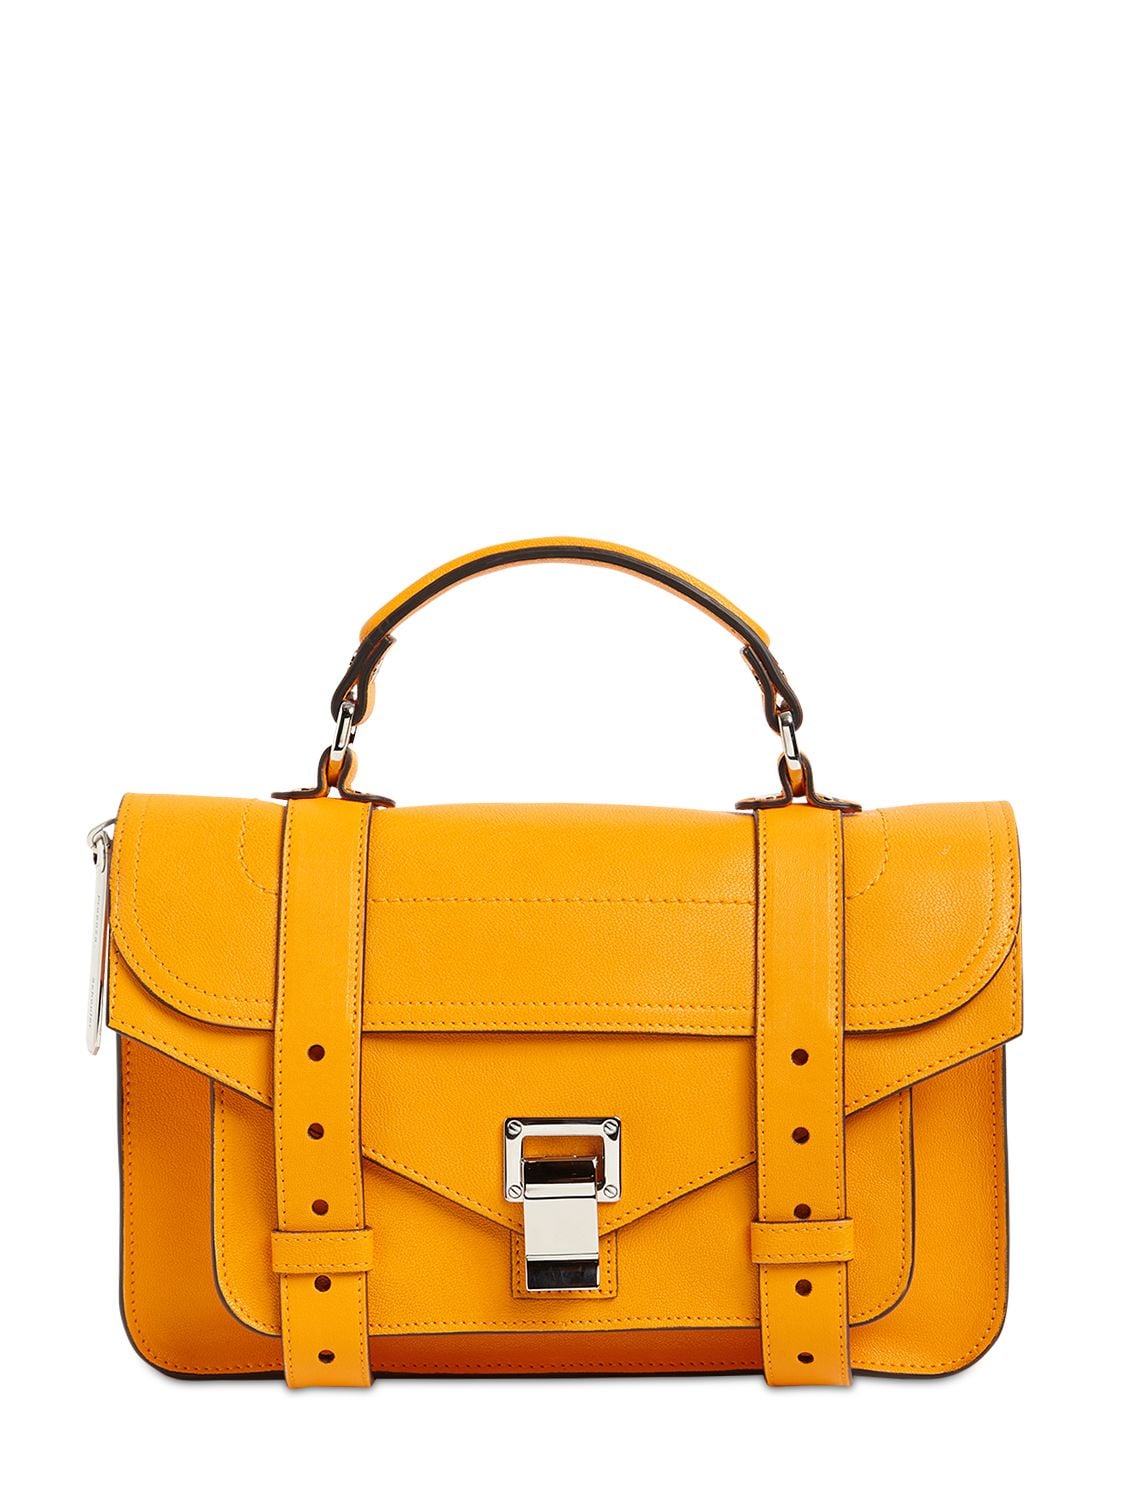 Proenza Schouler Ps1 Tiny Lux Leather Top Handle Bag In Marigold